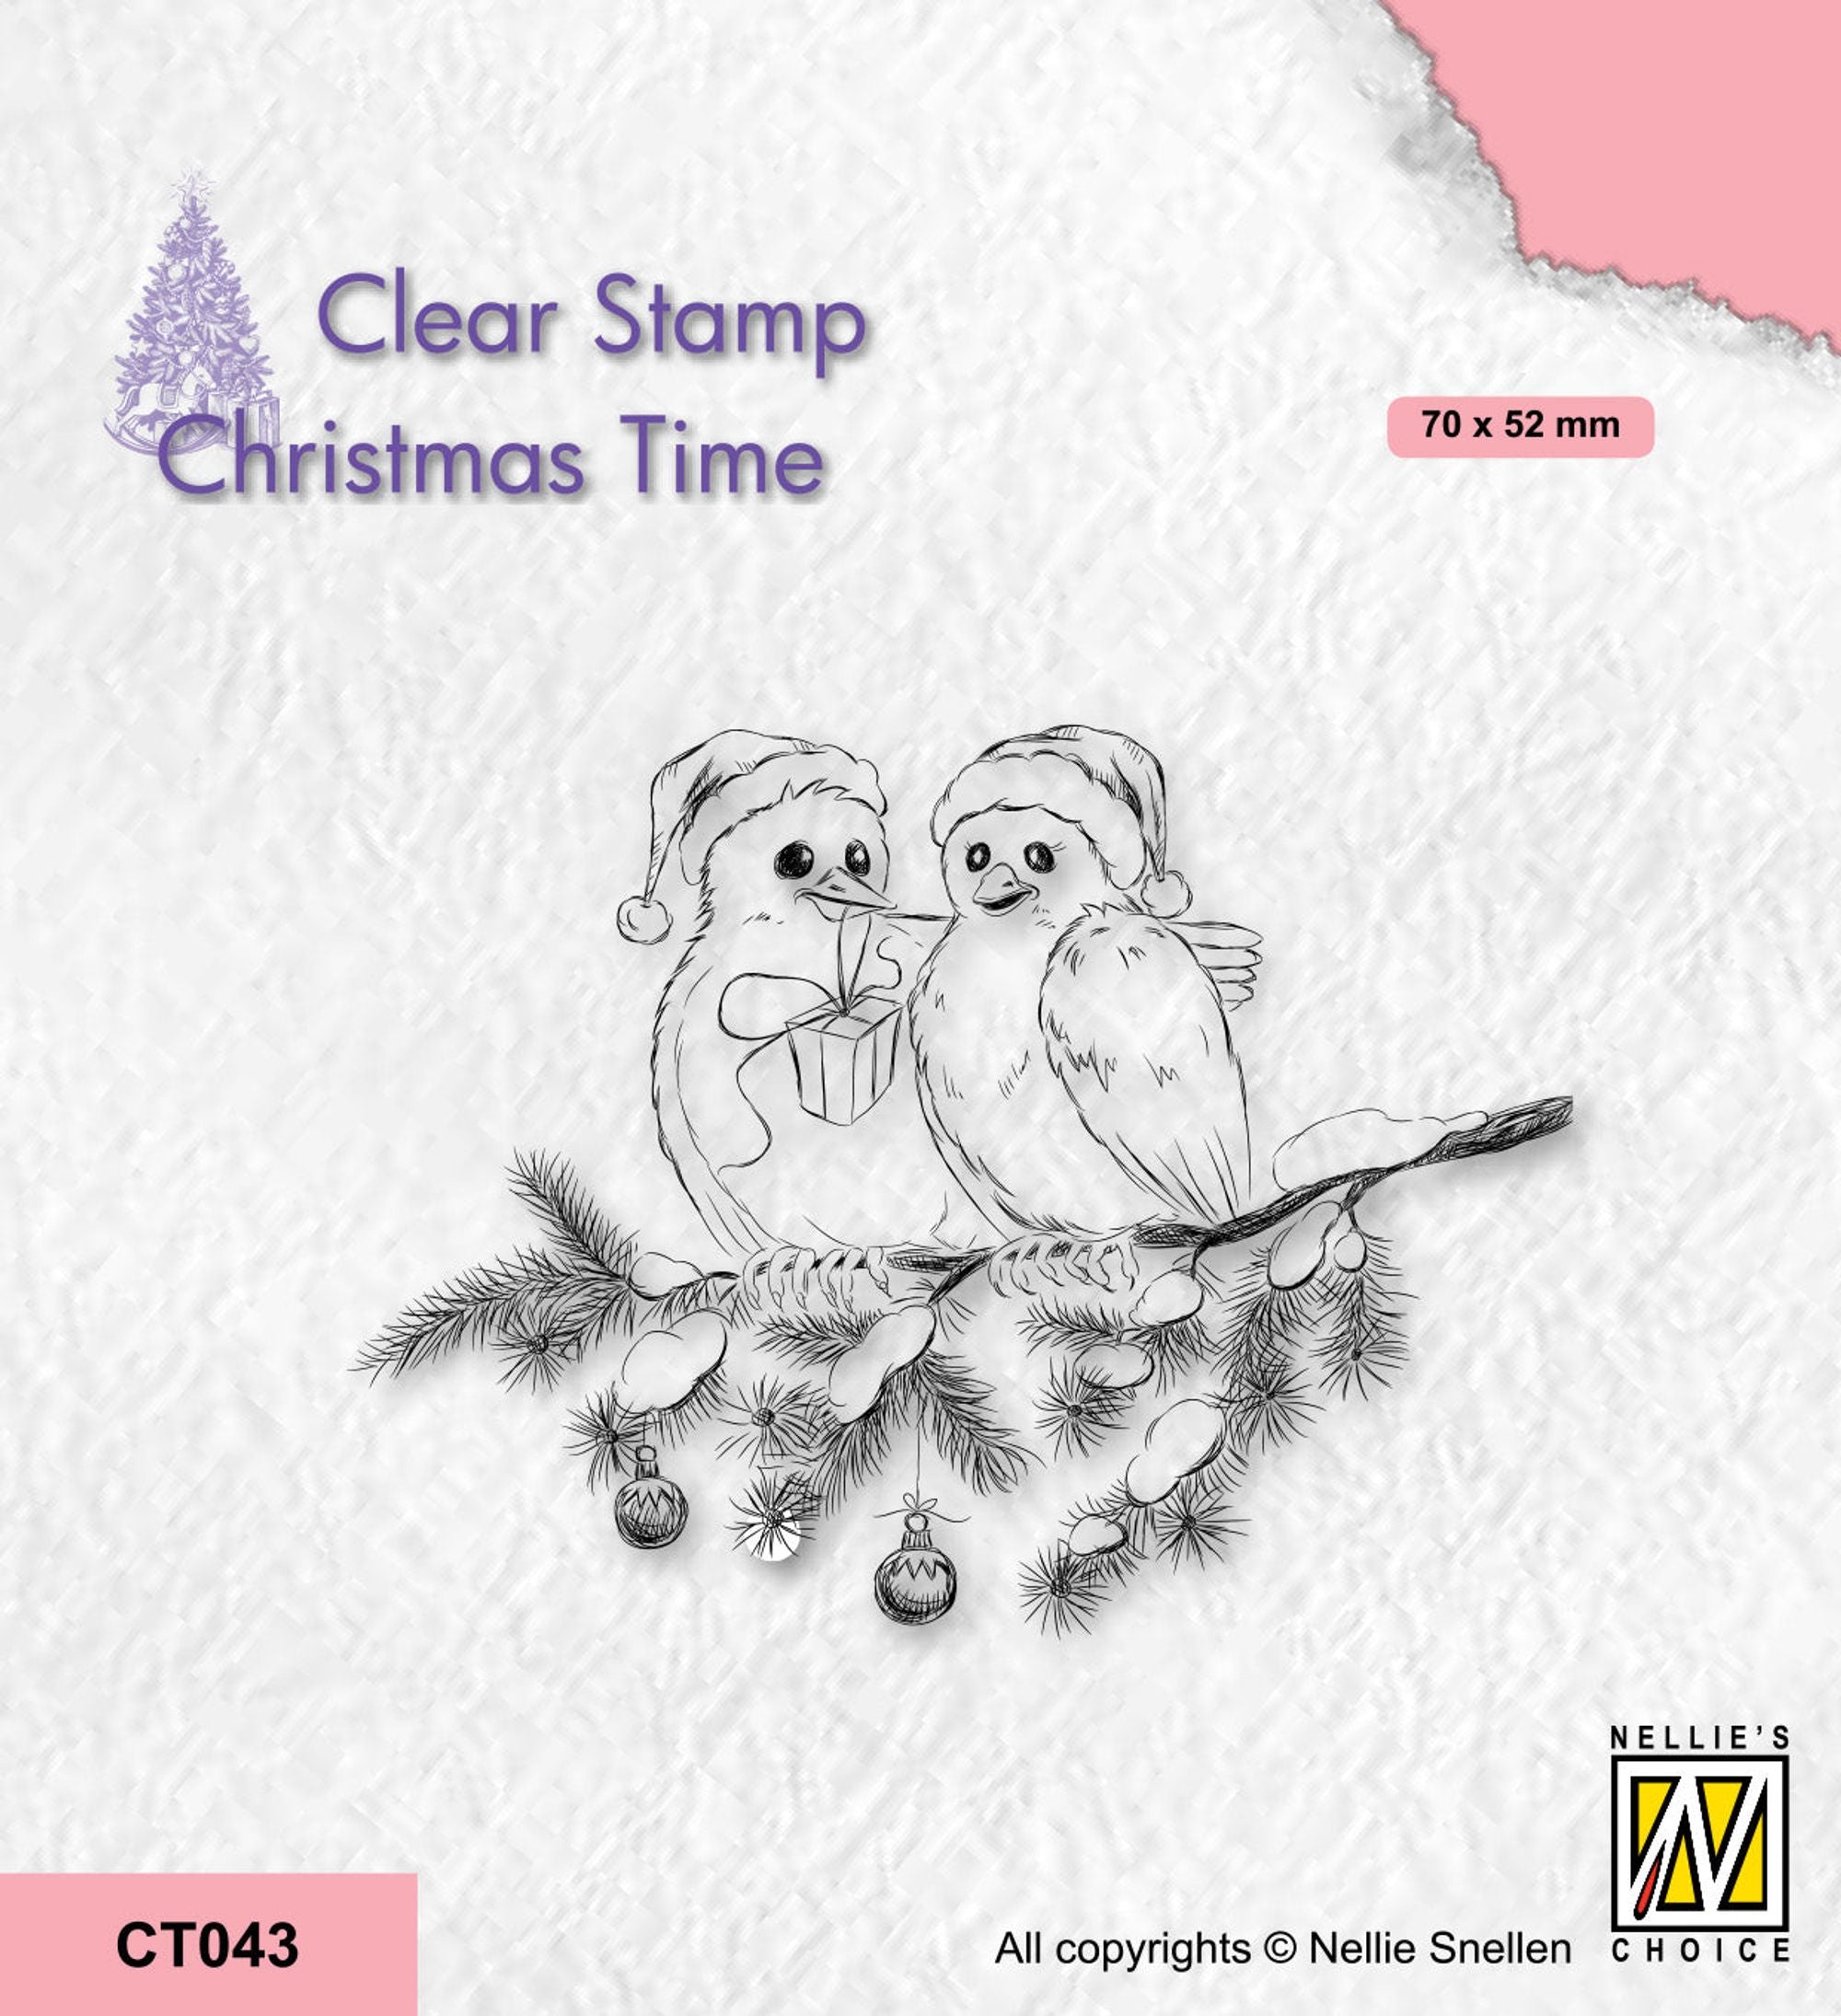 Nellie's Choice Clear Stamp Christmas Time - Celebrating Christmas